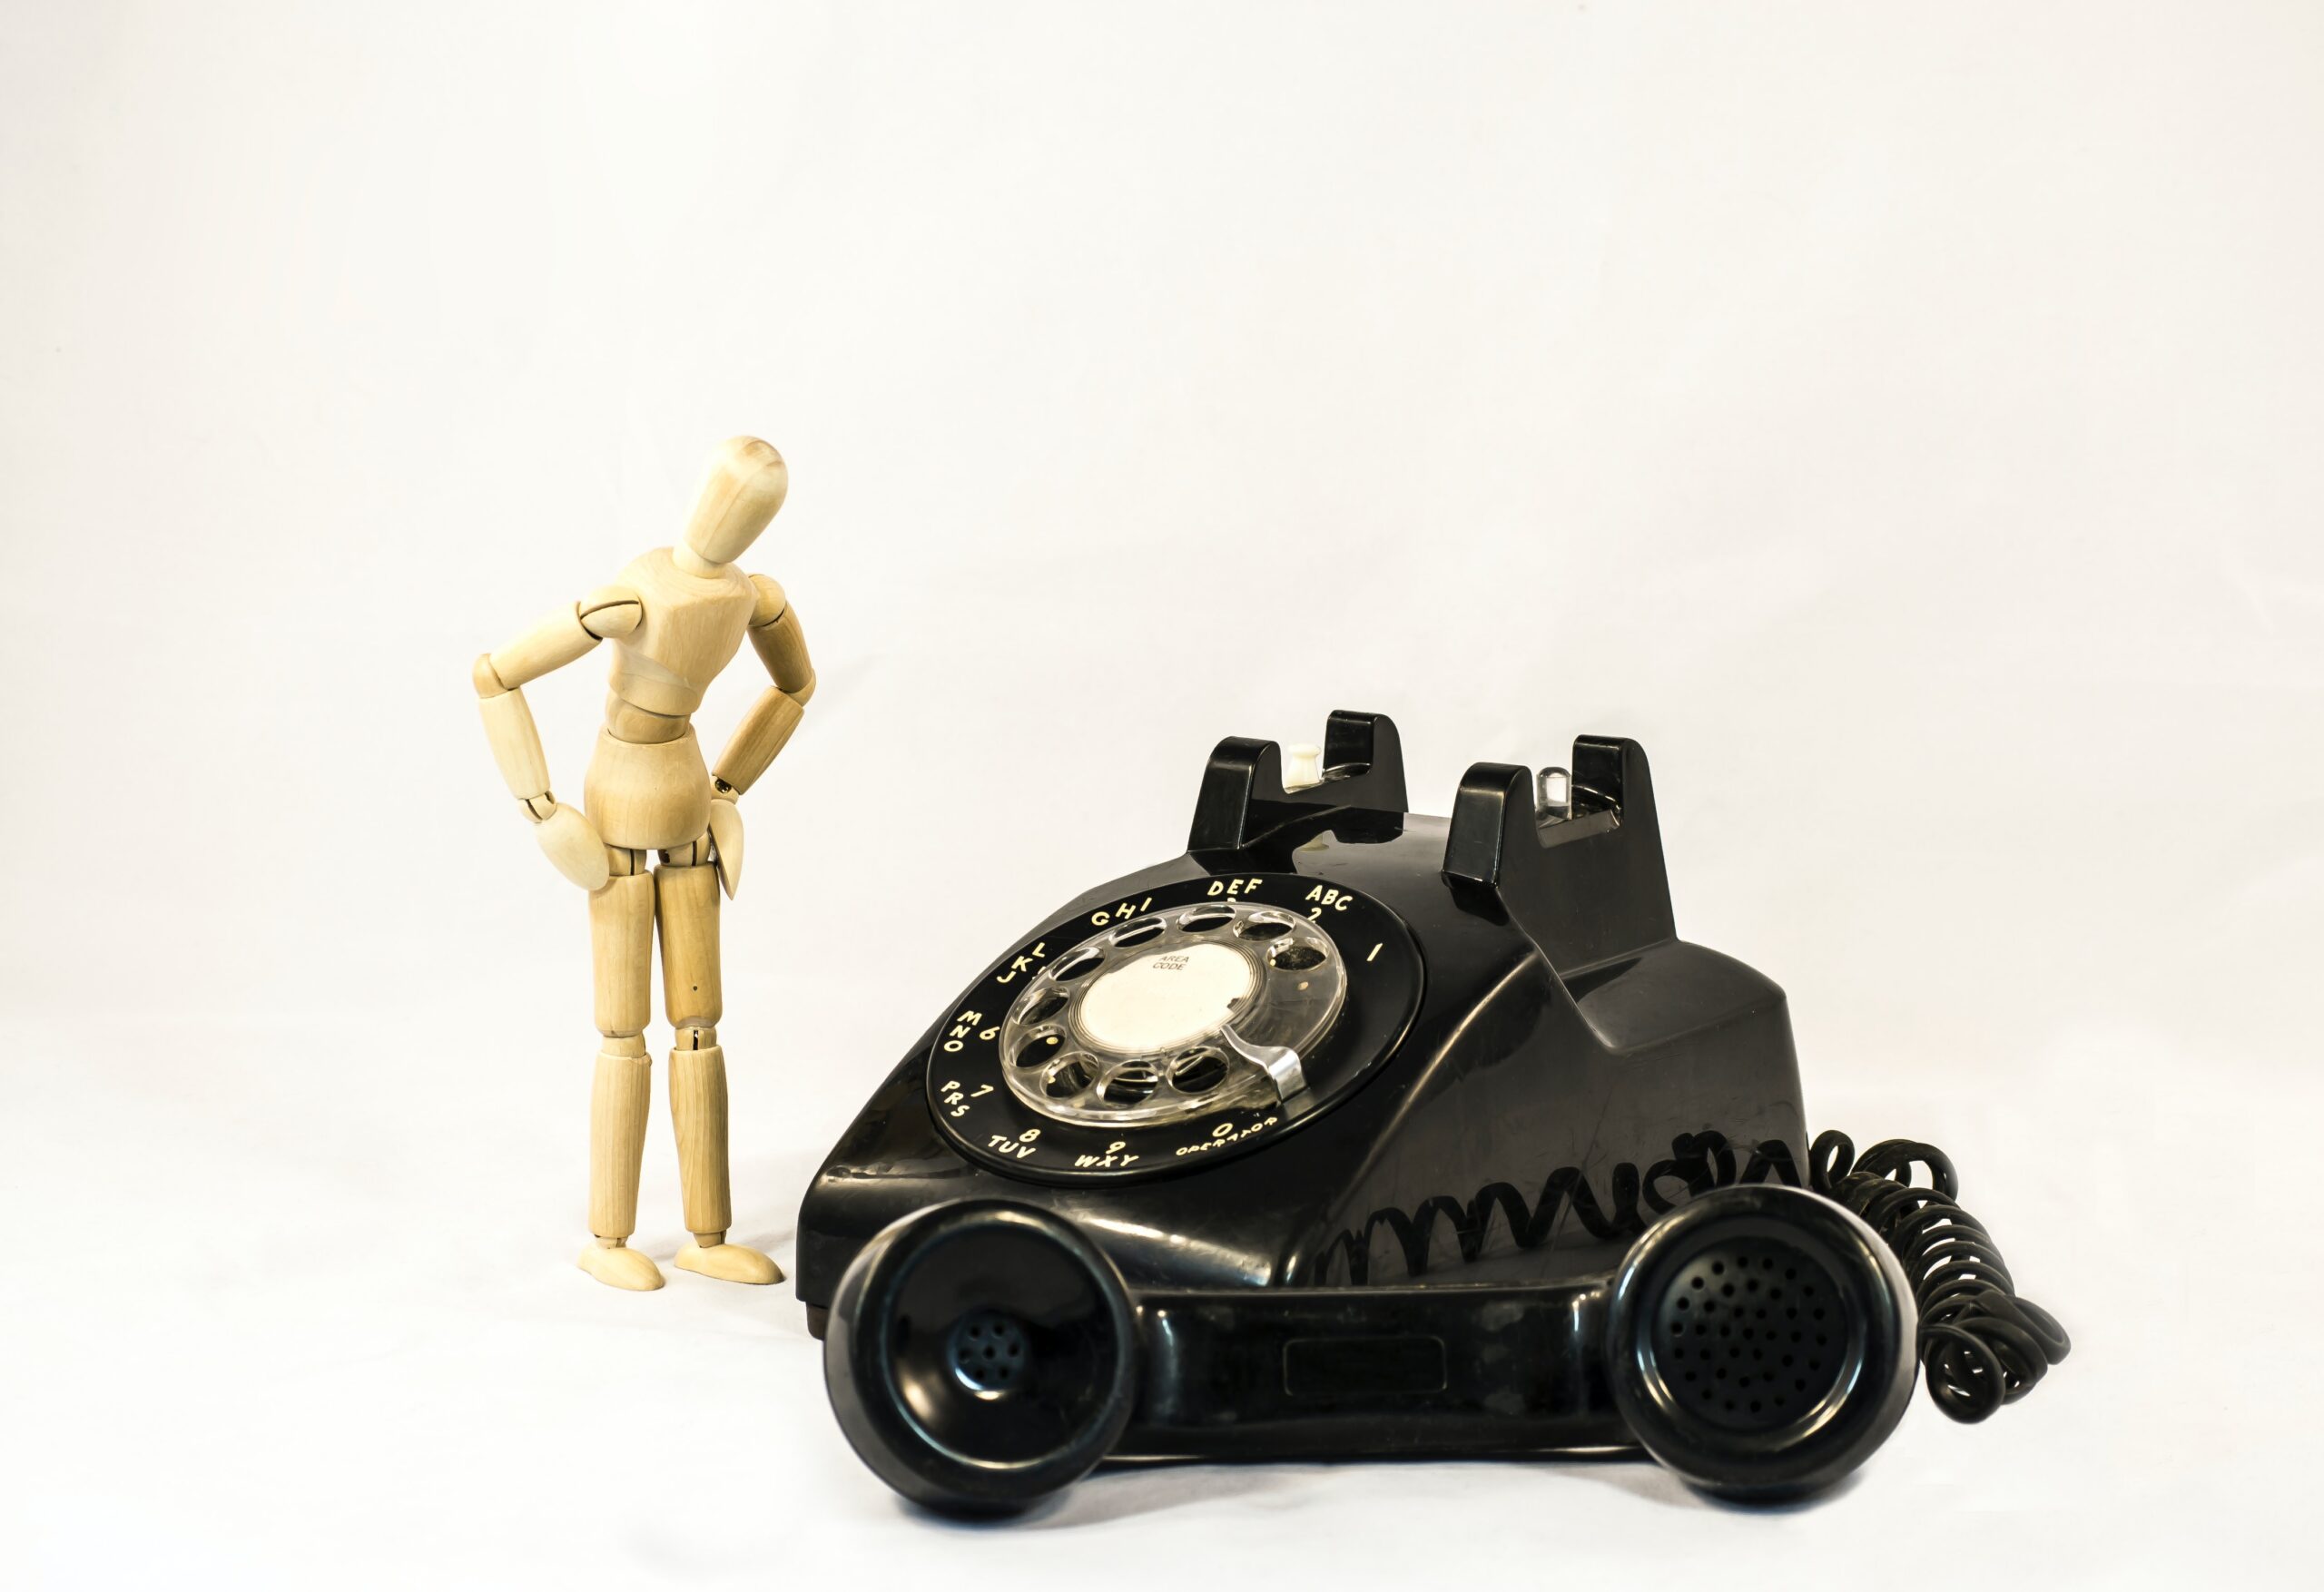 Telephone Consumer Protection Act (TCPA) Compliance